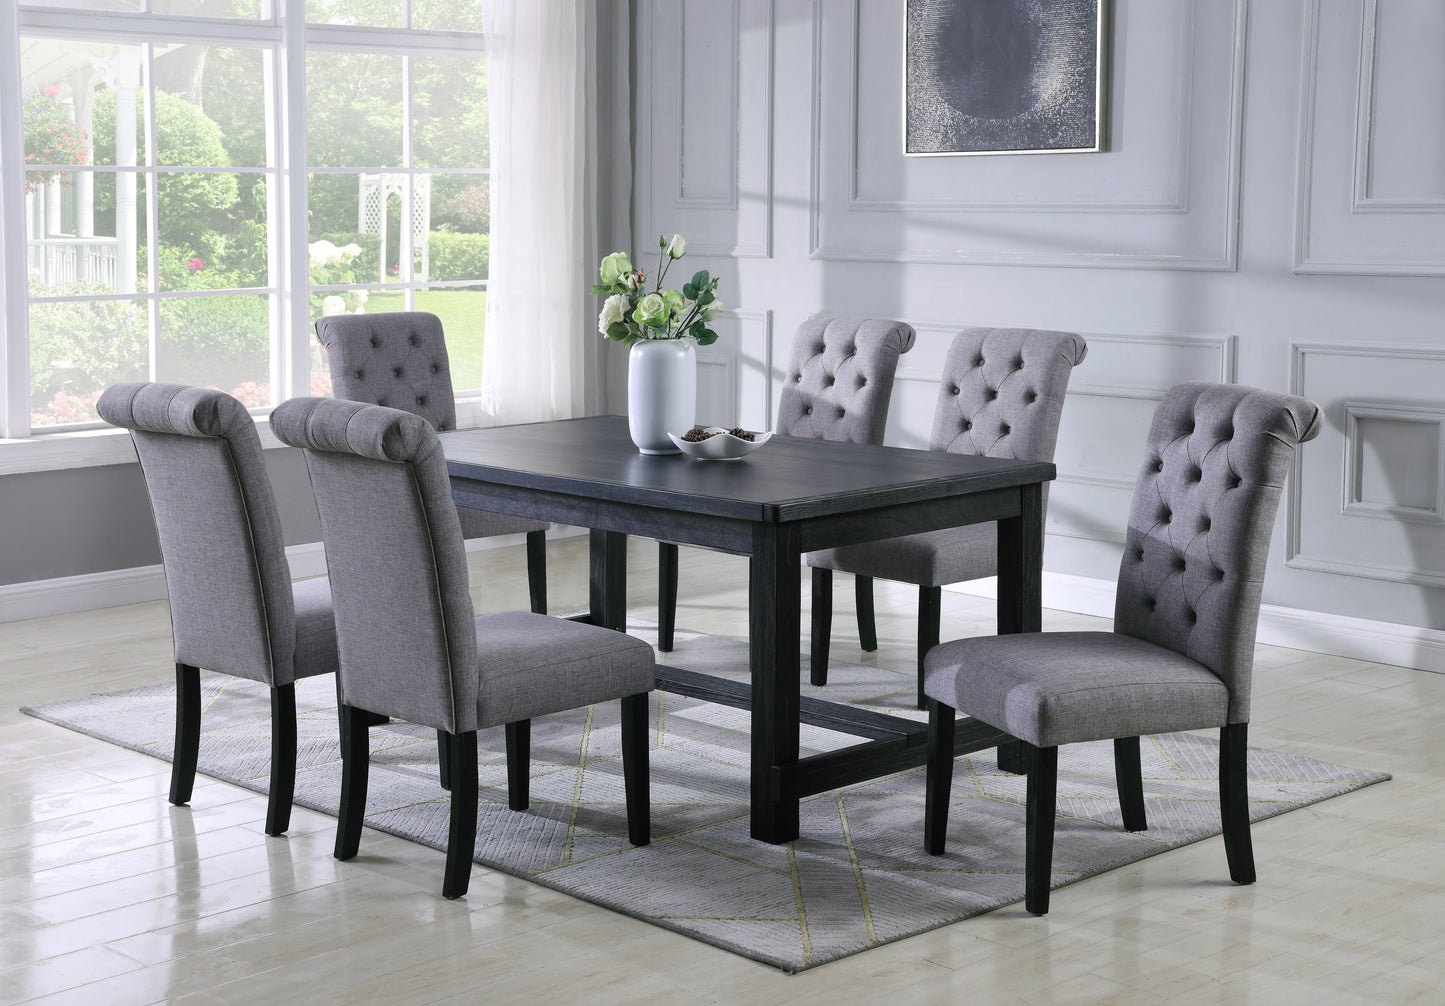 Leviton Antique Black Finished Wood Dining Set, Table with Six Chair, Gray